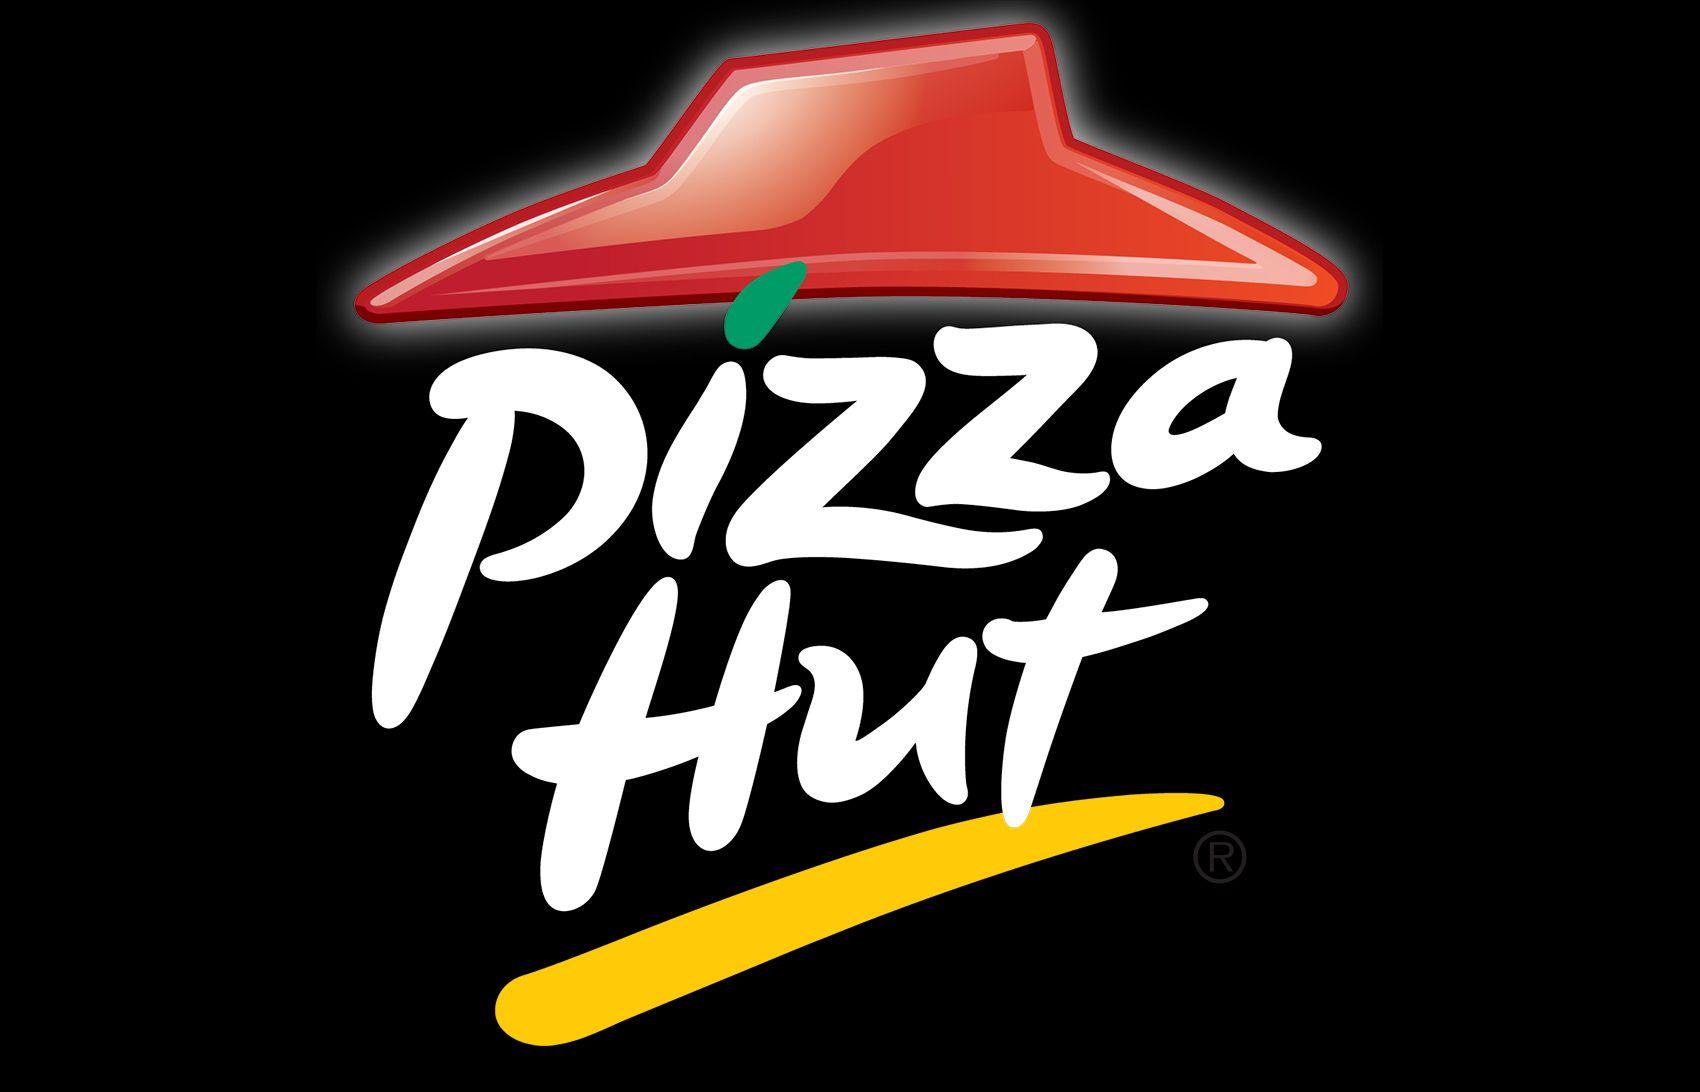 Pizza Hut 2018 Logo - Pizza Hut Logo, Pizza Hut Symbol, Meaning, History and Evolution